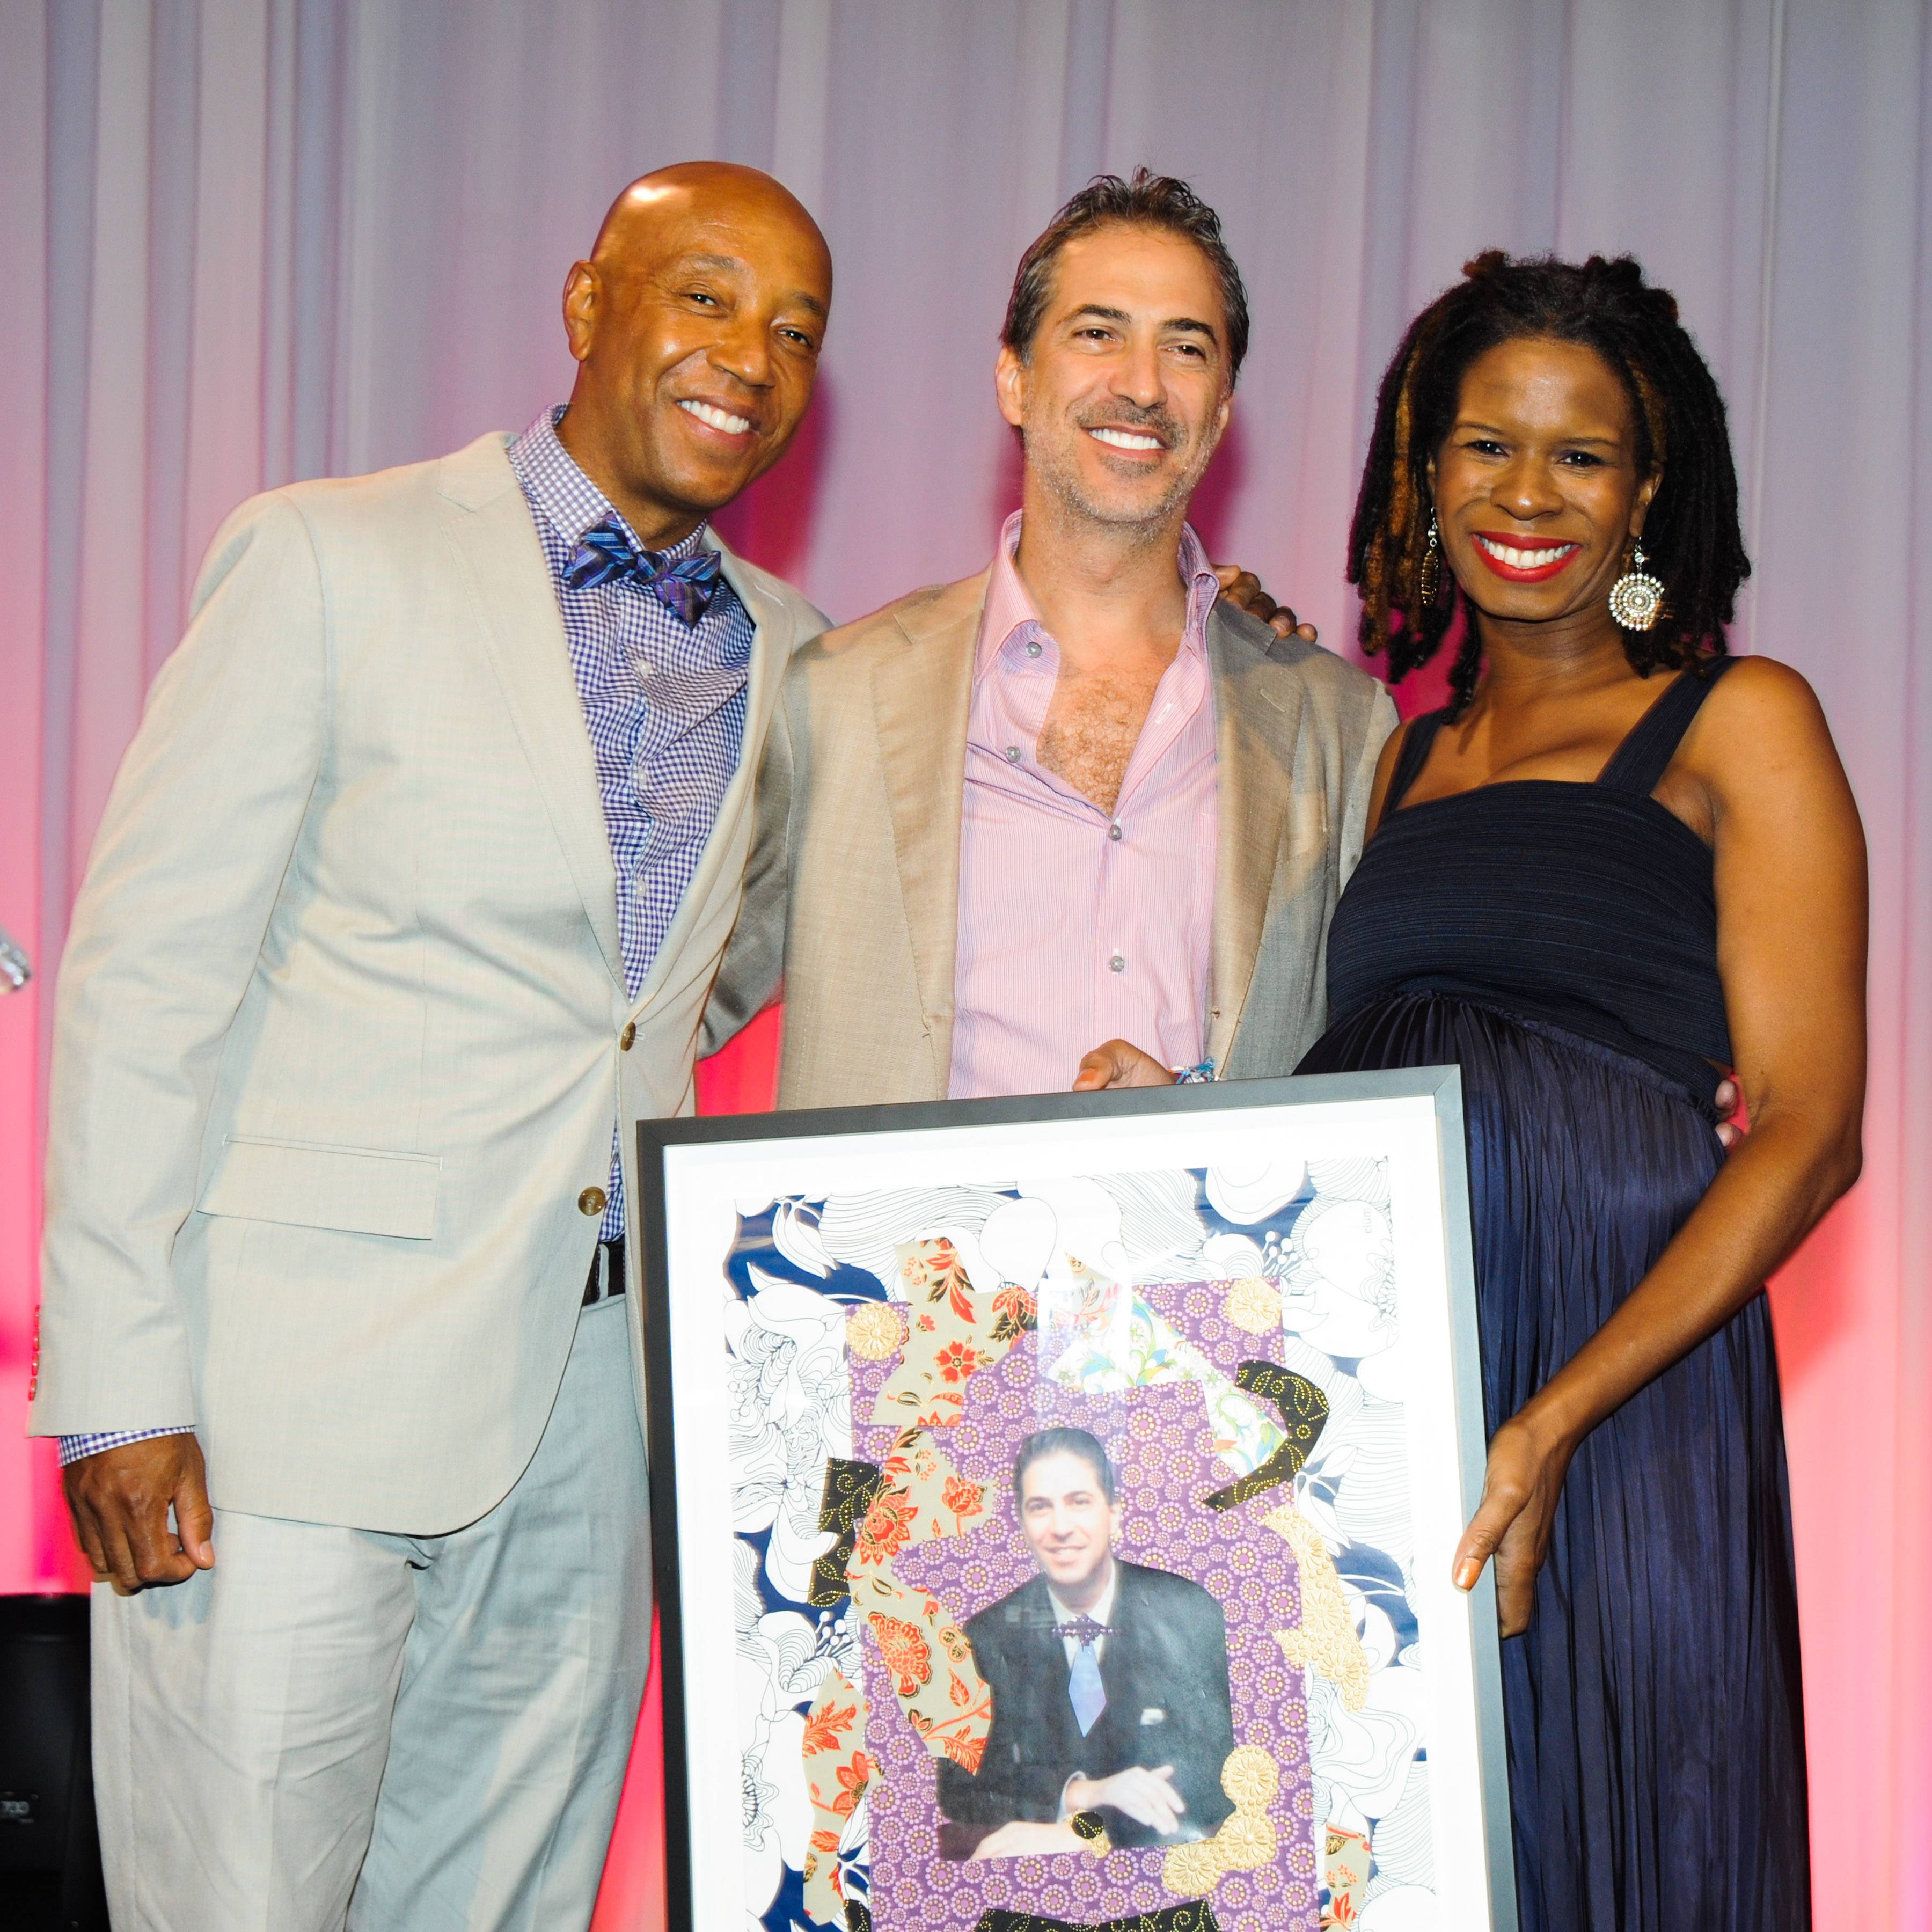 Marc Leder, Tangie Murray, and Russell Simmons Accepting Award